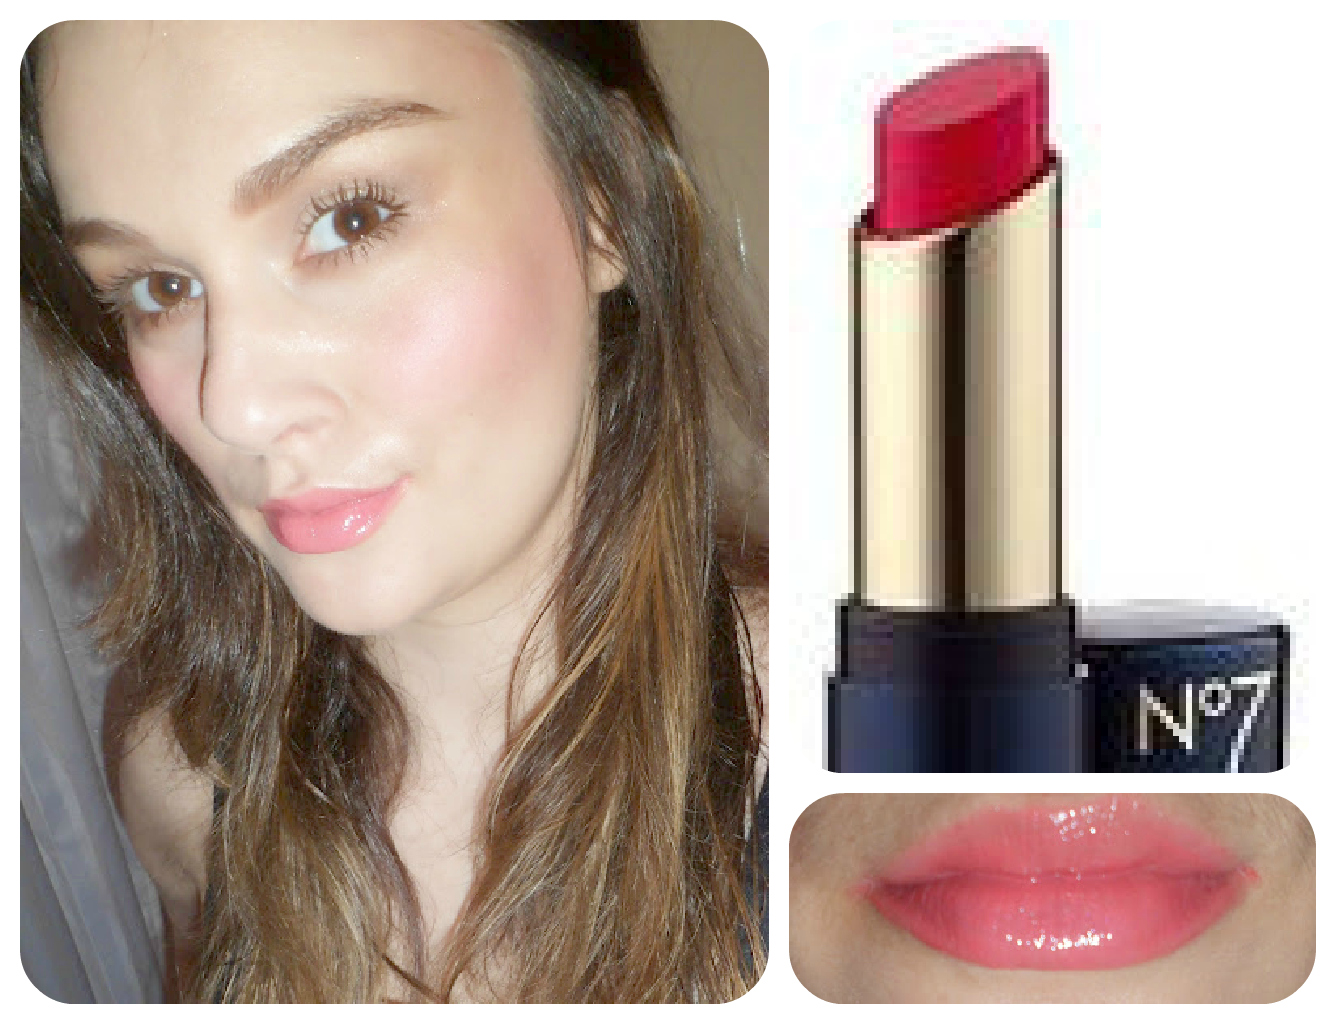 Chanel Coco Balm in Pink Delight! It's very hydrating and looks super